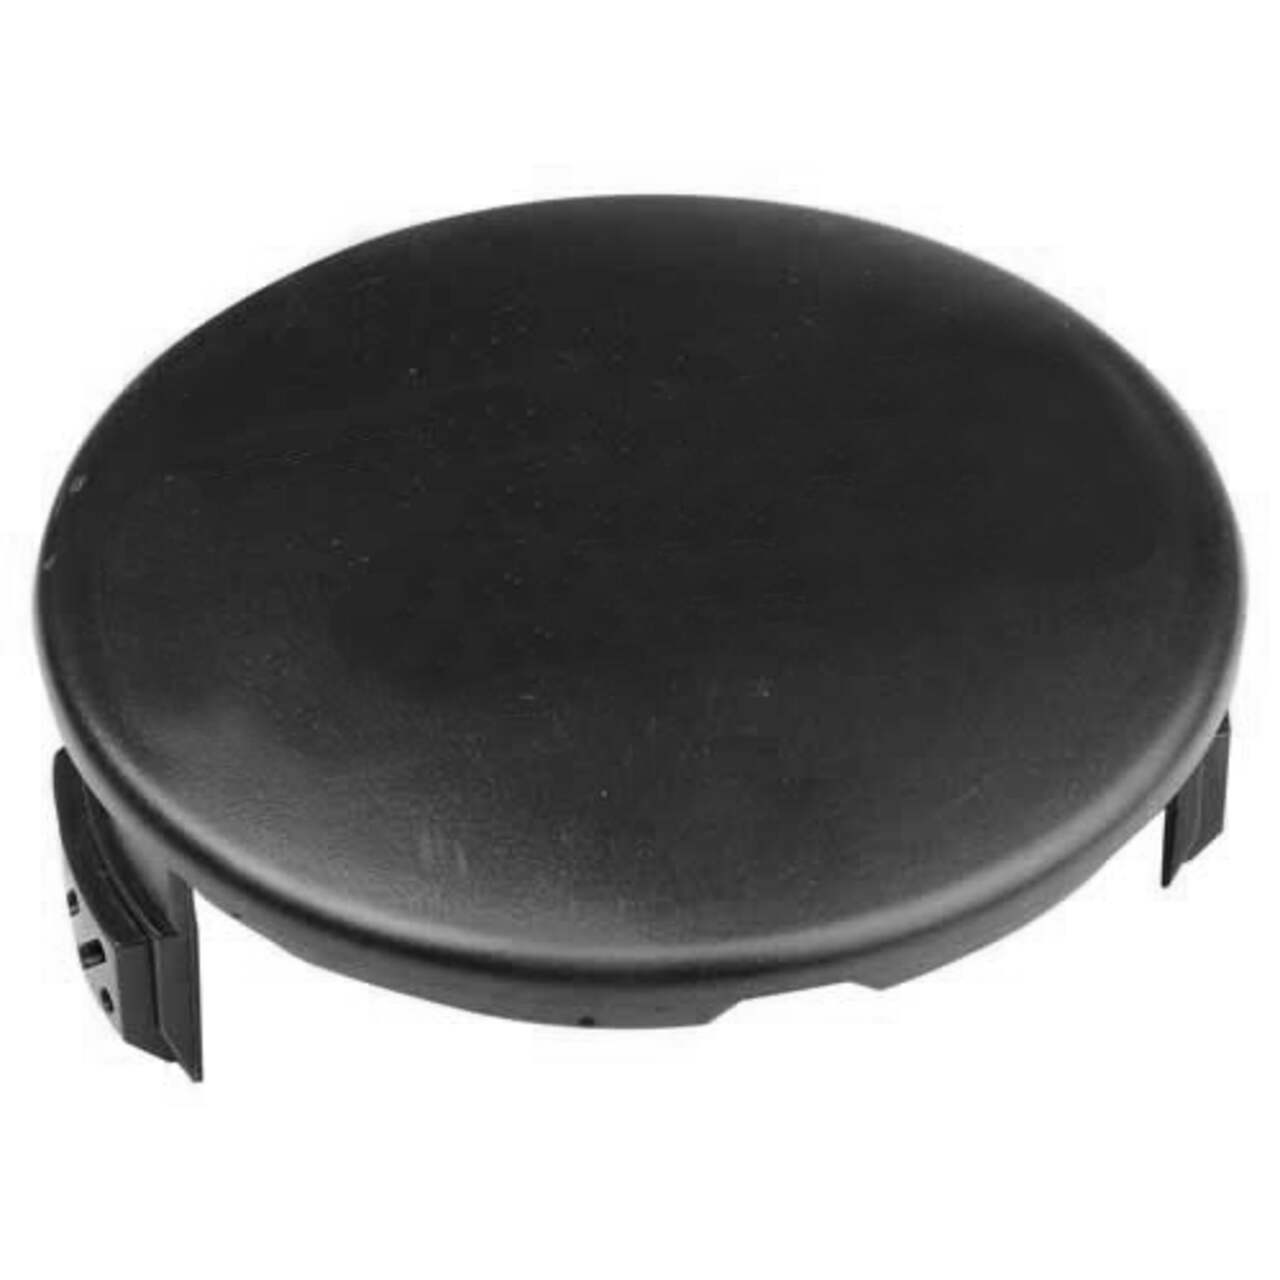 https://media-www.canadiantire.ca/product/seasonal-gardening/outdoor-tools/hand-held-outdoor-power-tools/0603041/yardworks-single-line-auto-feed-replacement-spool-cover-97f72729-c976-4a8a-95ae-ce8f4c66c505.png?imdensity=1&imwidth=640&impolicy=mZoom